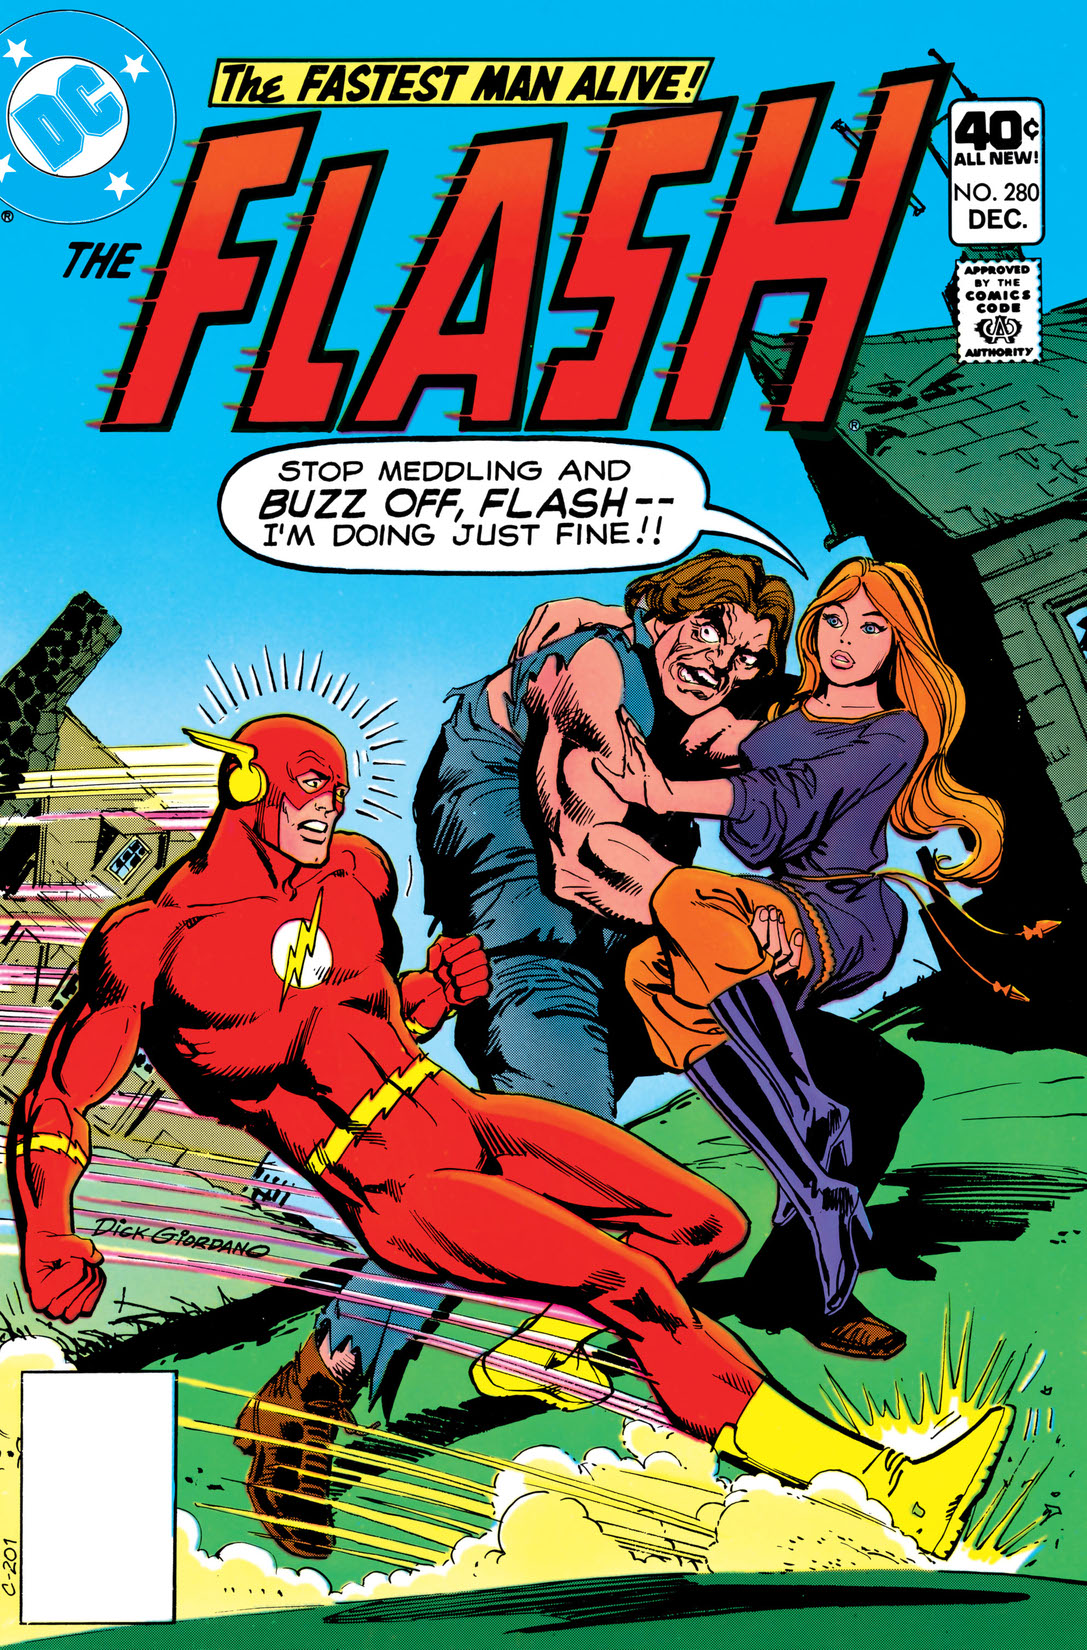 The Flash (1959-) #280 preview images